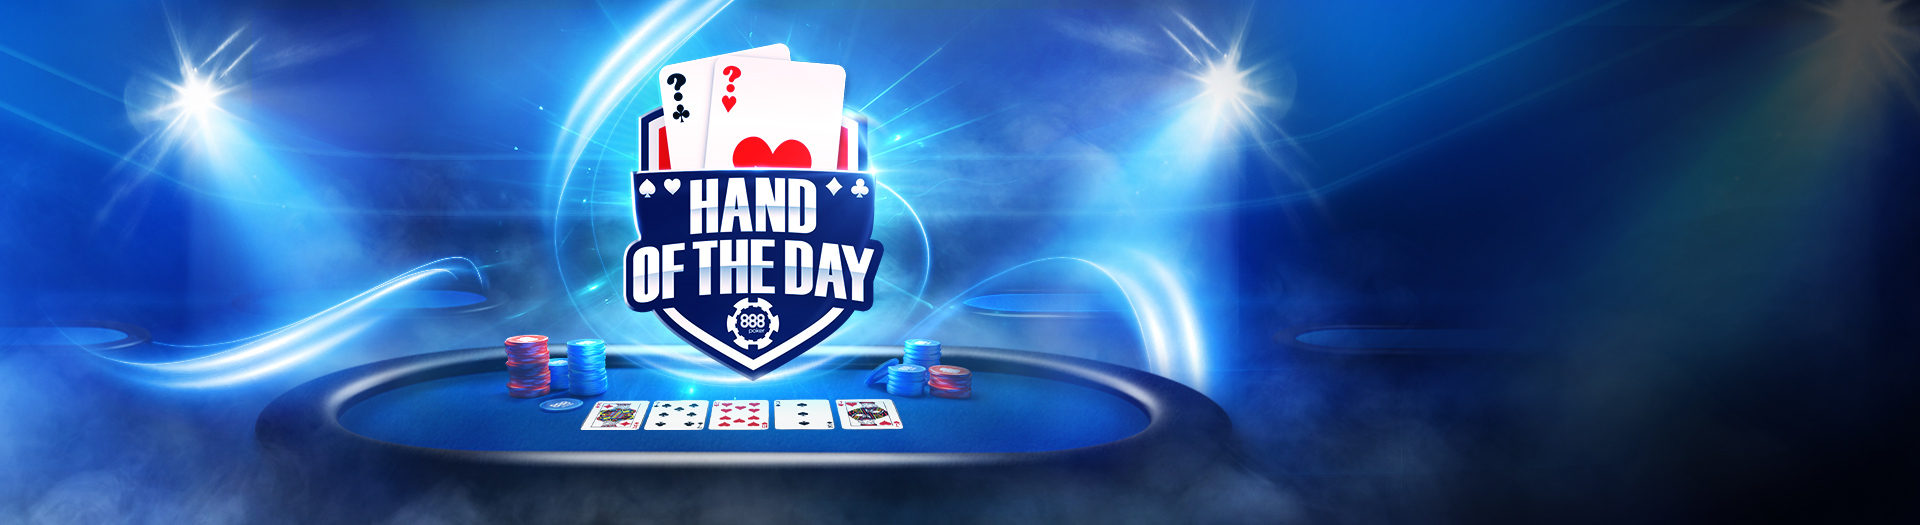 888 poker hand of the day